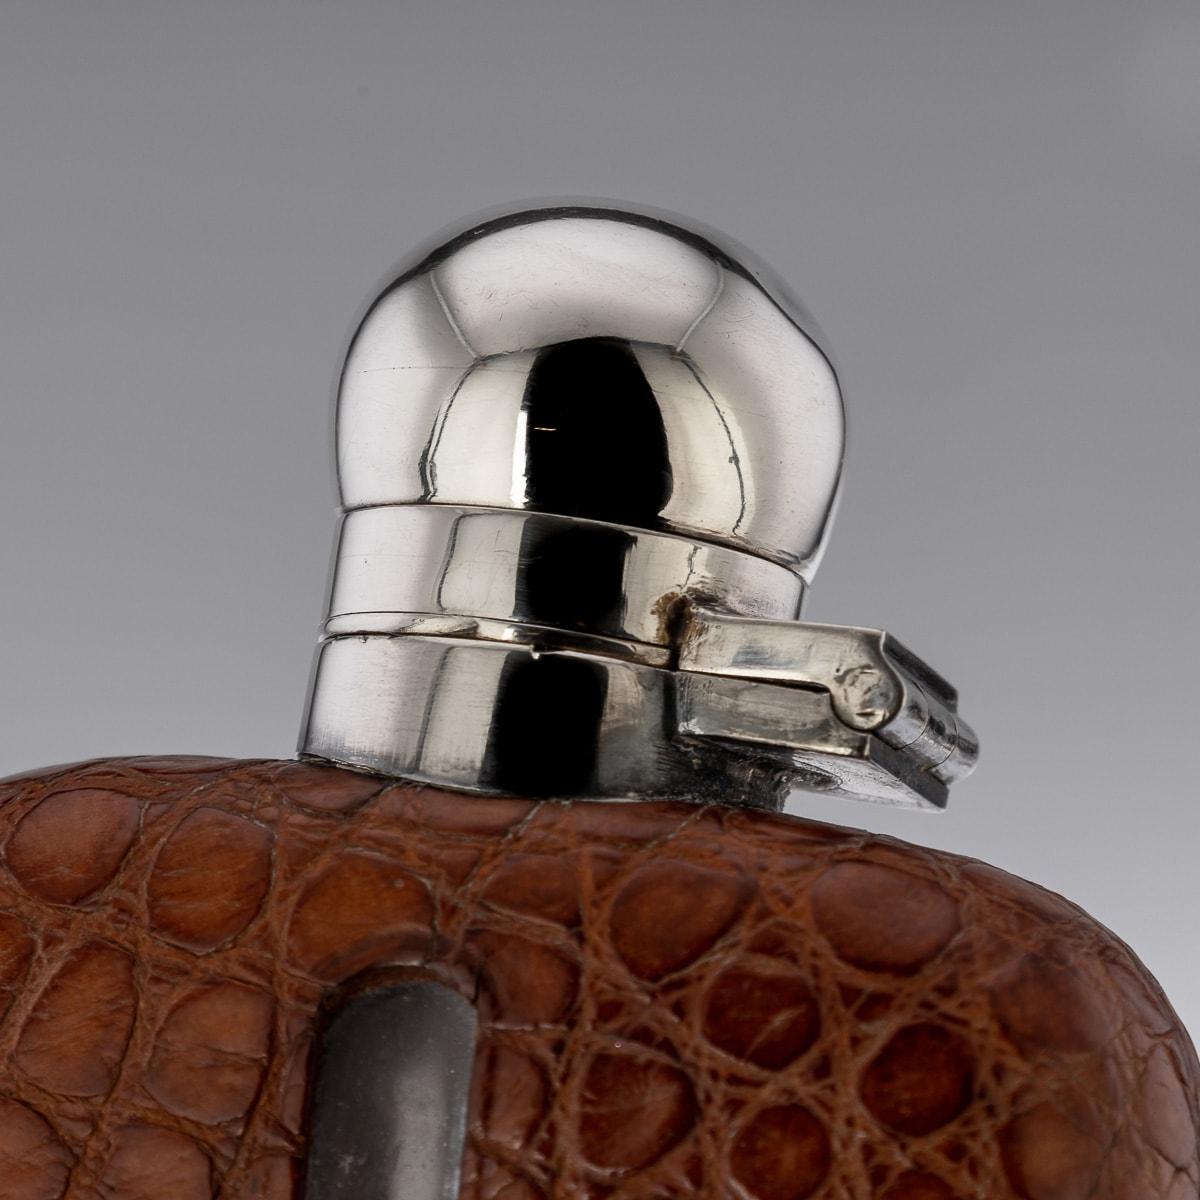 A superb 20th Century solid silver, blown glass and bound in sumptuous crocodile leather hip flask, of rounded rectangular form, with a pull off cup, top mounted with a large hinged lid. Hallmarked with English silver (925 standard), Sheffield, year